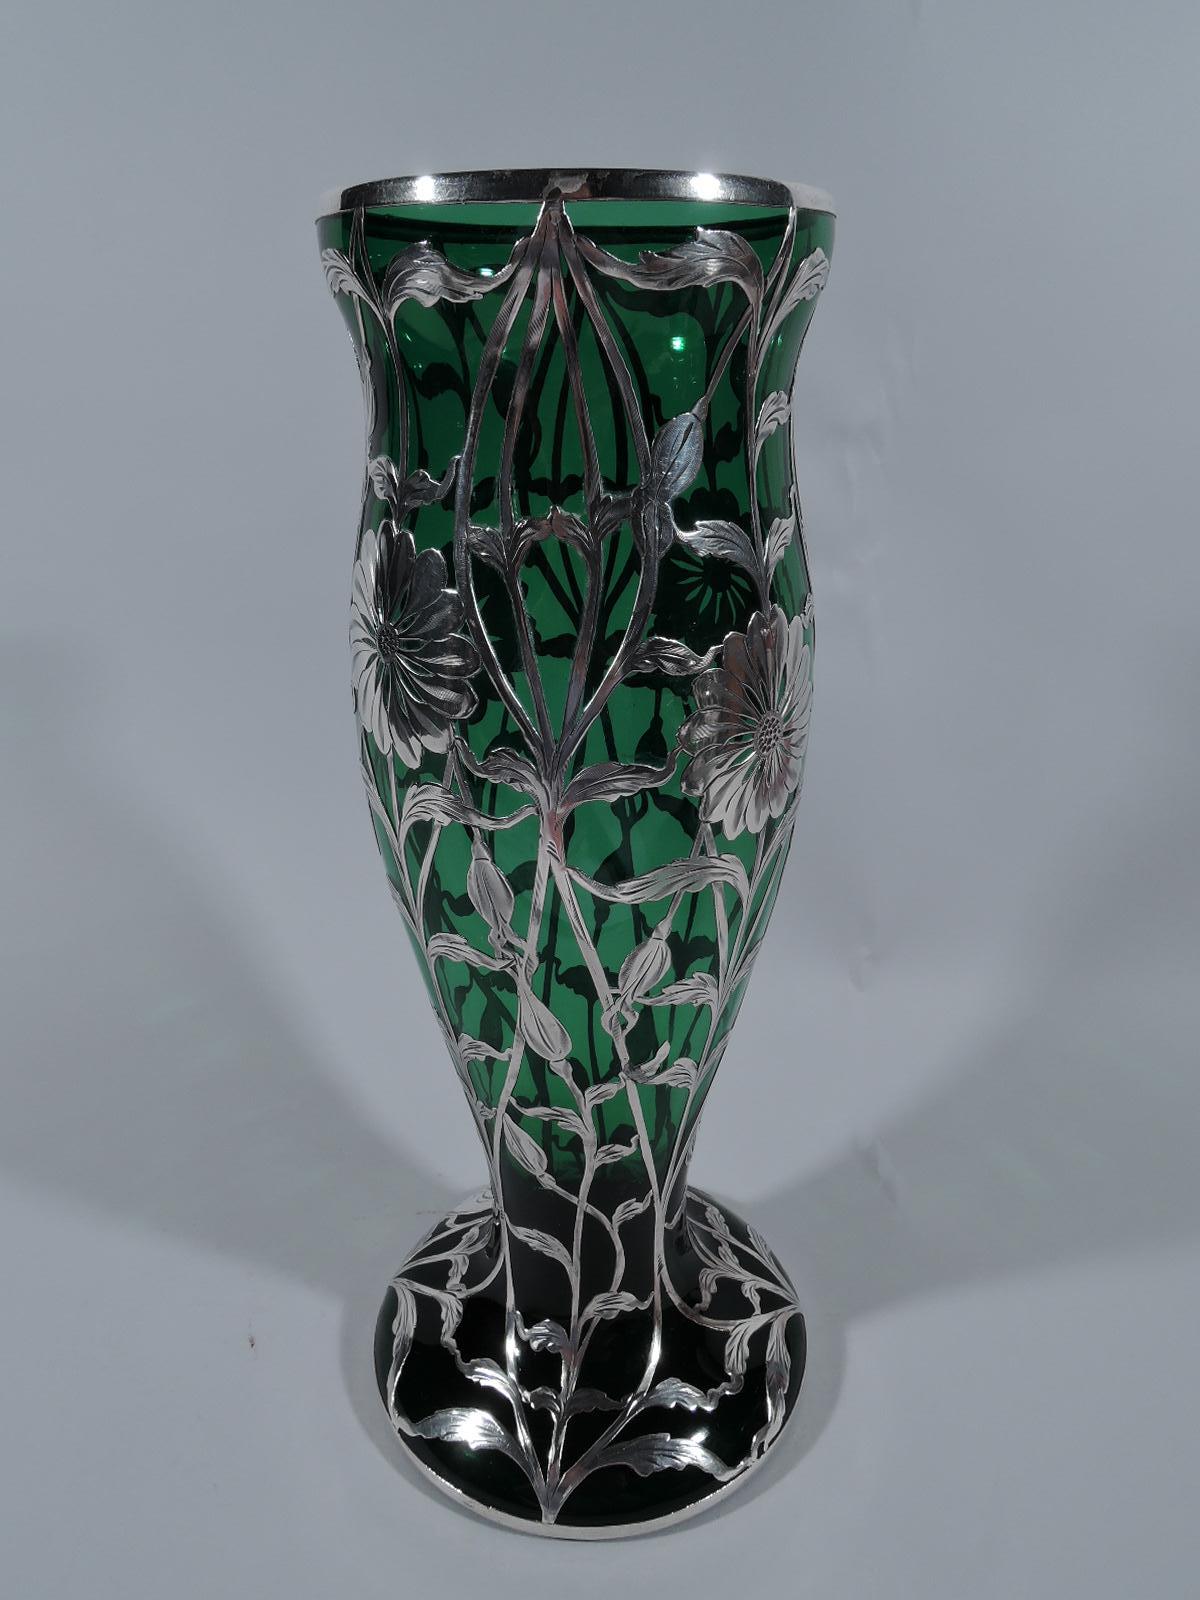 Turn-of-the-century Art Nouveau green glass vase with engraved silver overlay. Made by Matthews (later Hickok-Matthews) in Newark. Tall and full baluster flowing into spread round foot. Vertical overlay pattern comprising stems flowers and tendrils.